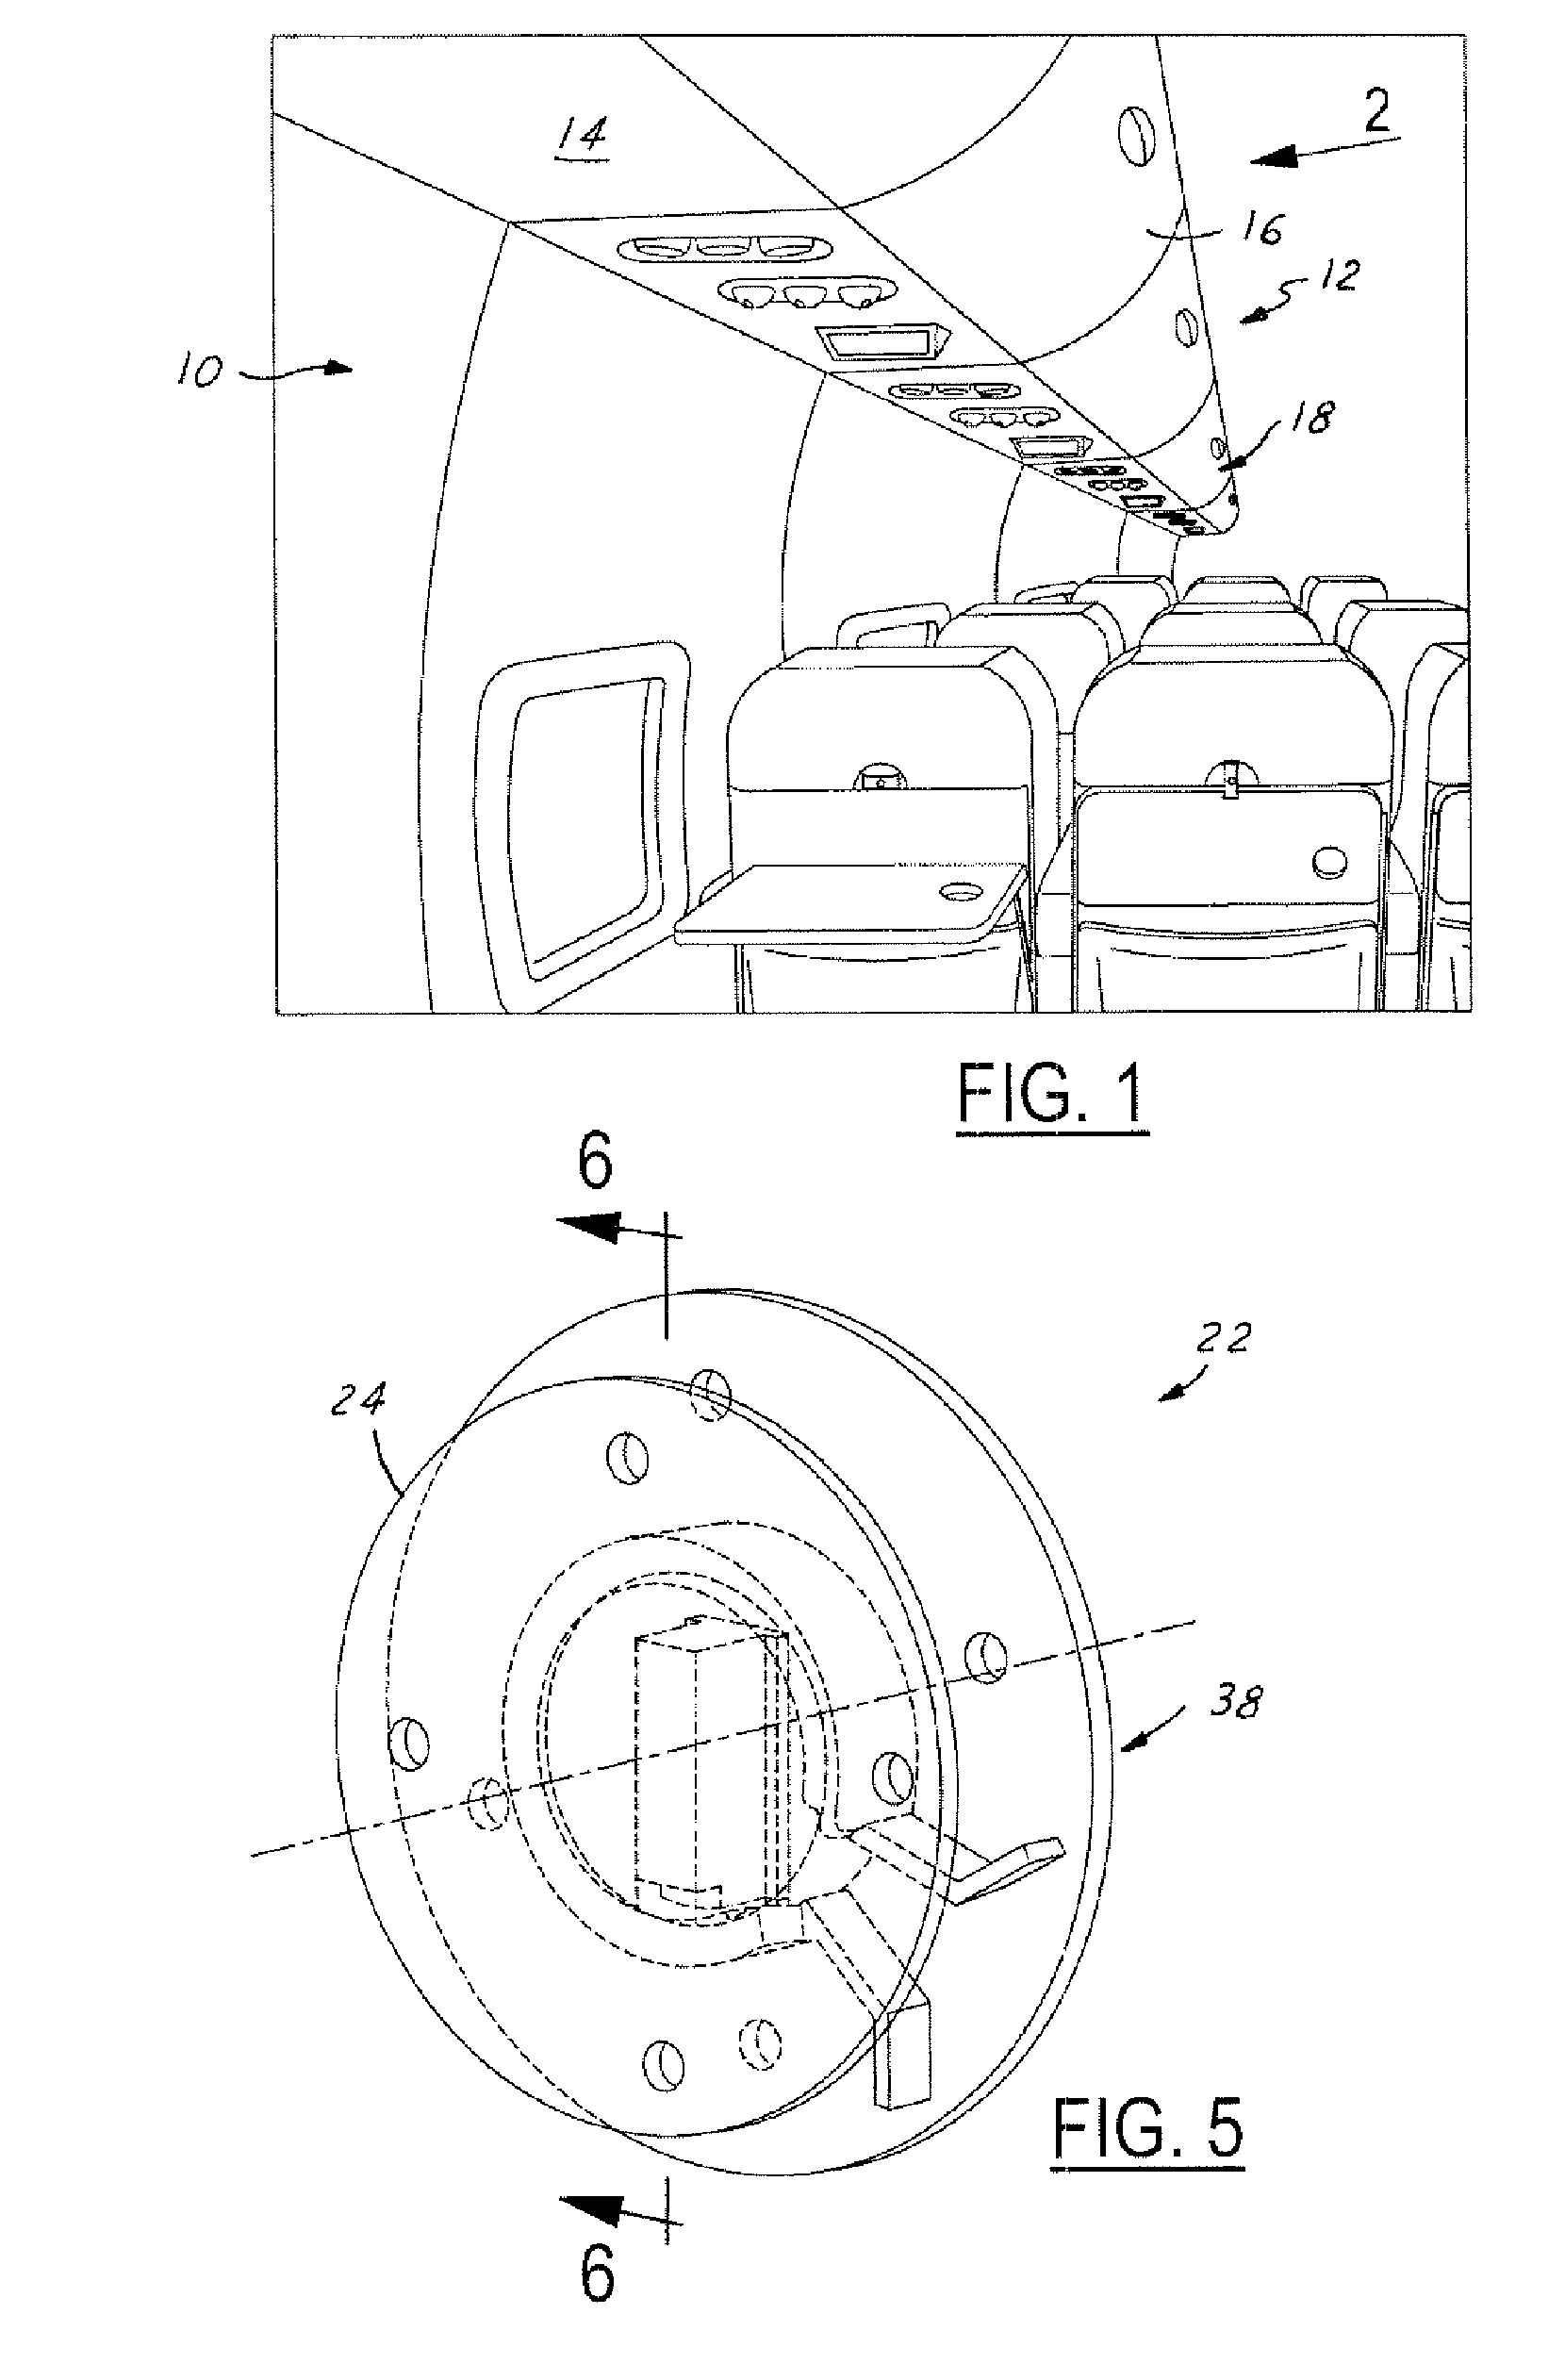 Pivot mechanism for quick installation of stowage bins or rotating items